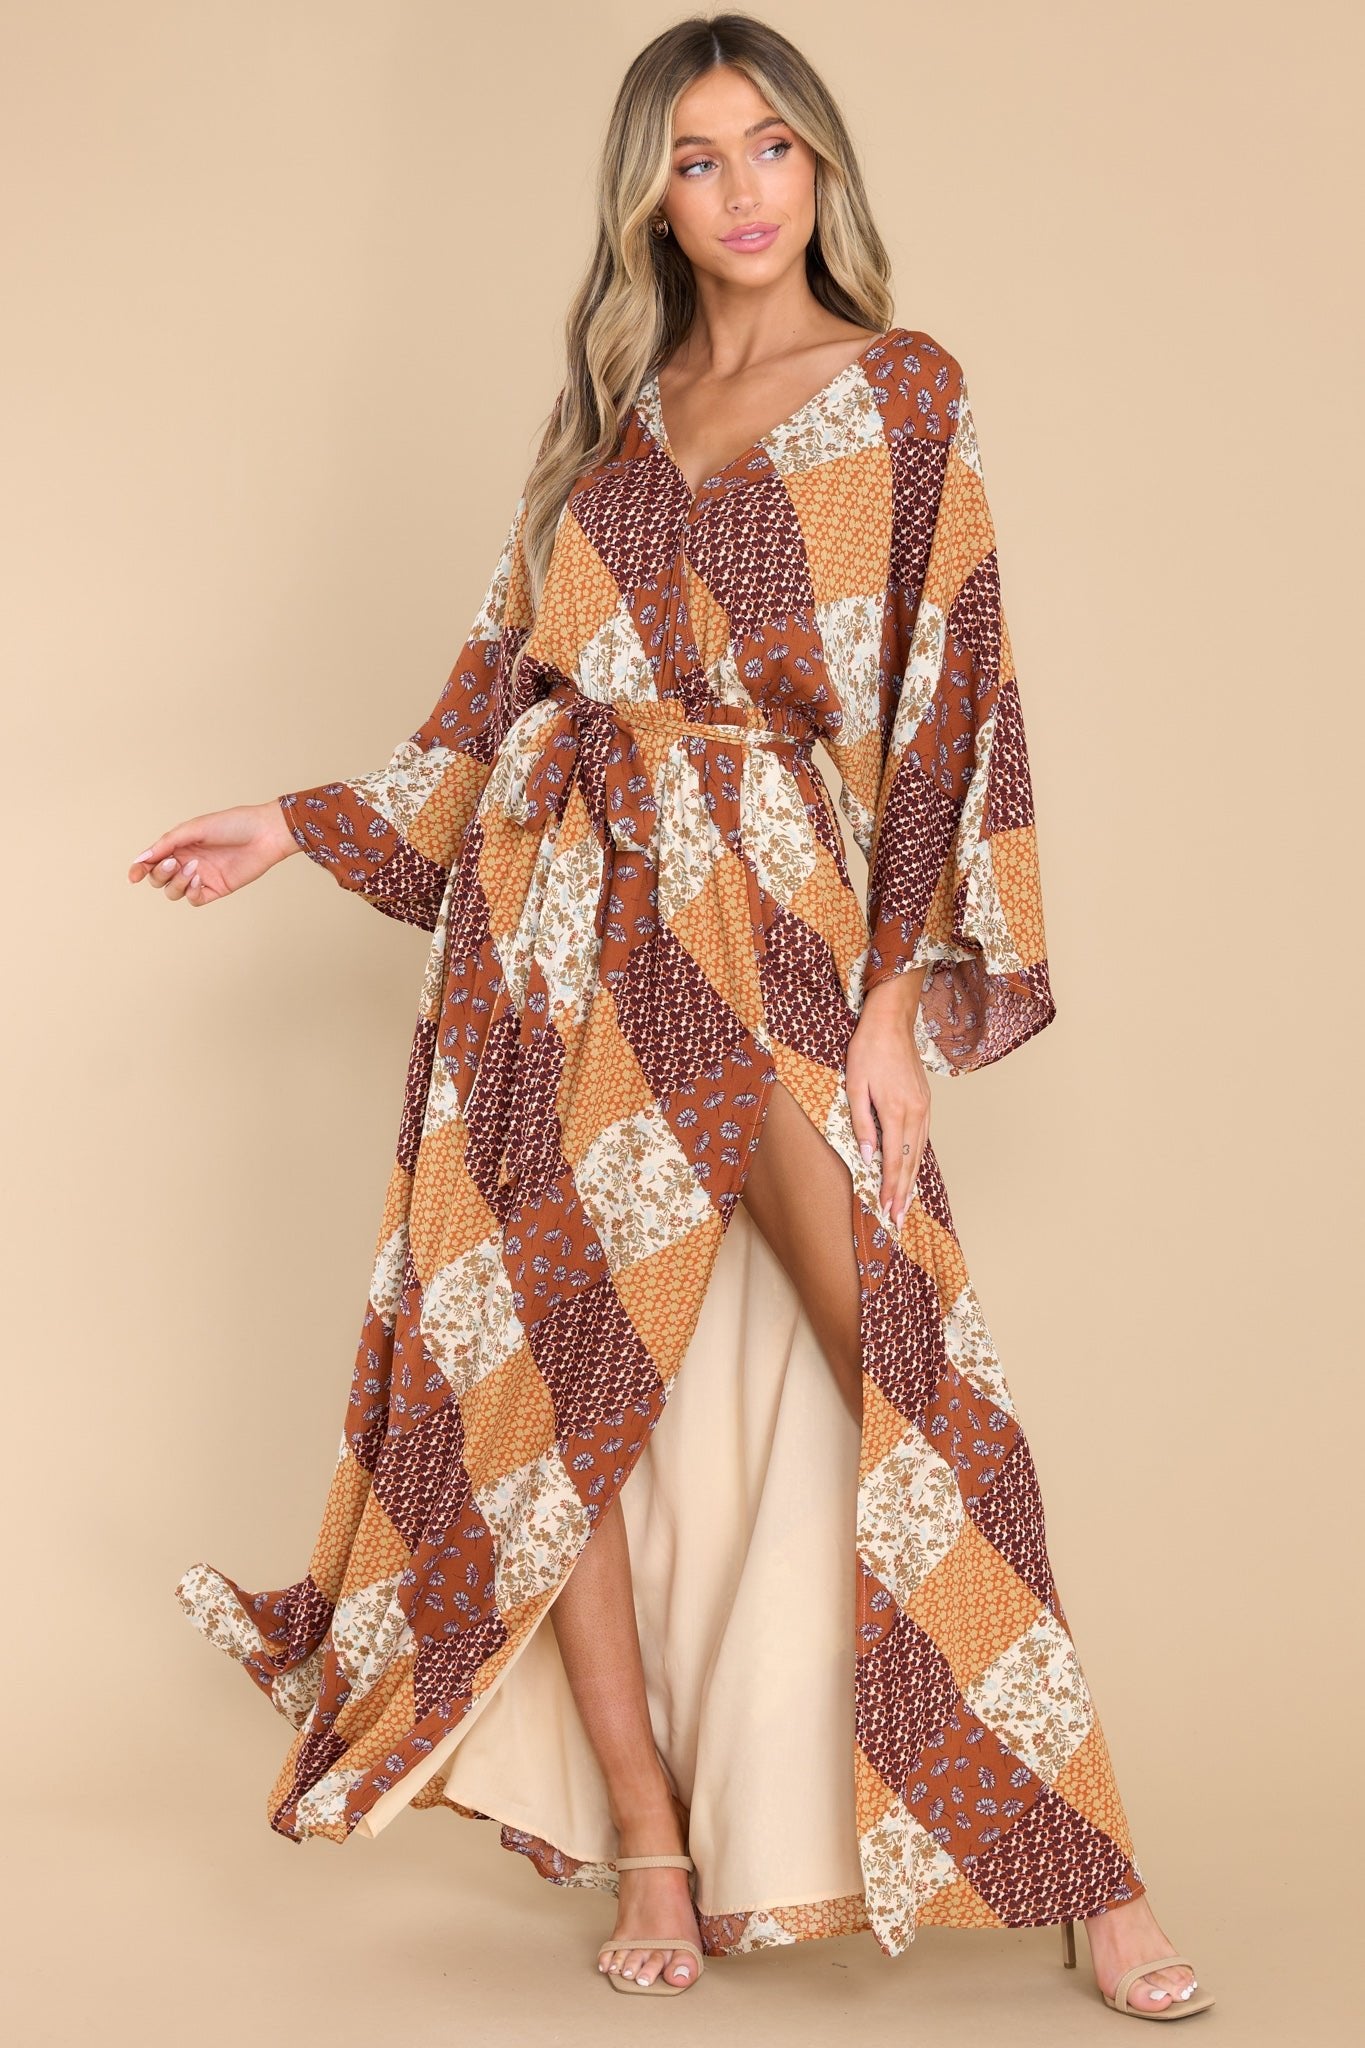 Glowing Comfort Brown Floral Print Maxi Dress - Red Dress